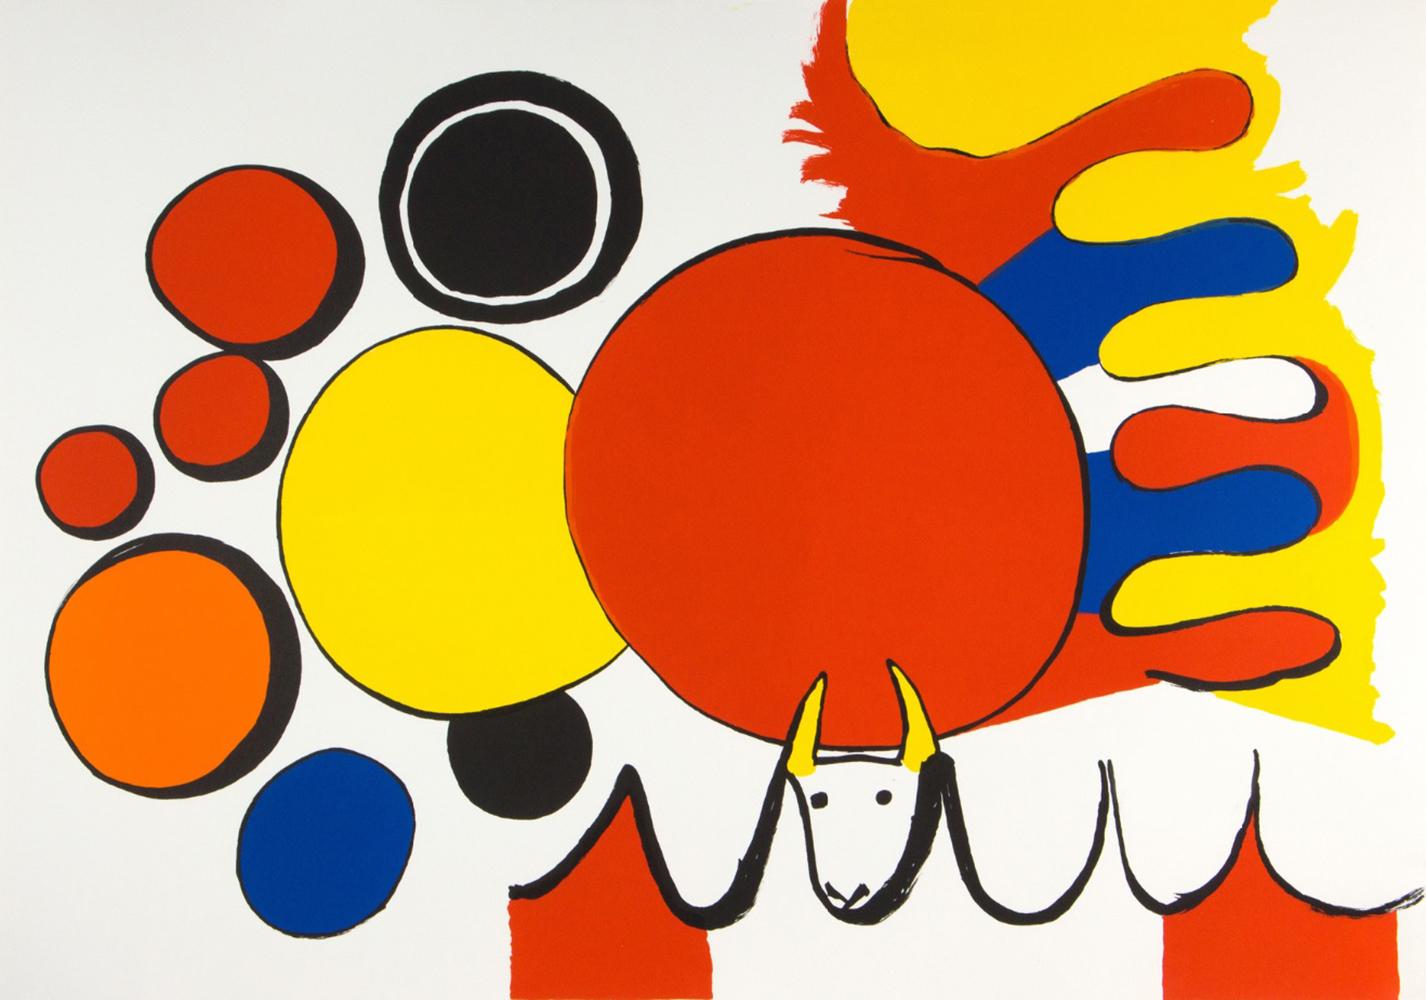 Alexander Calder Interior Print - 'Bull and Circles (From Poems to Watch)' Lithograph proof 1975